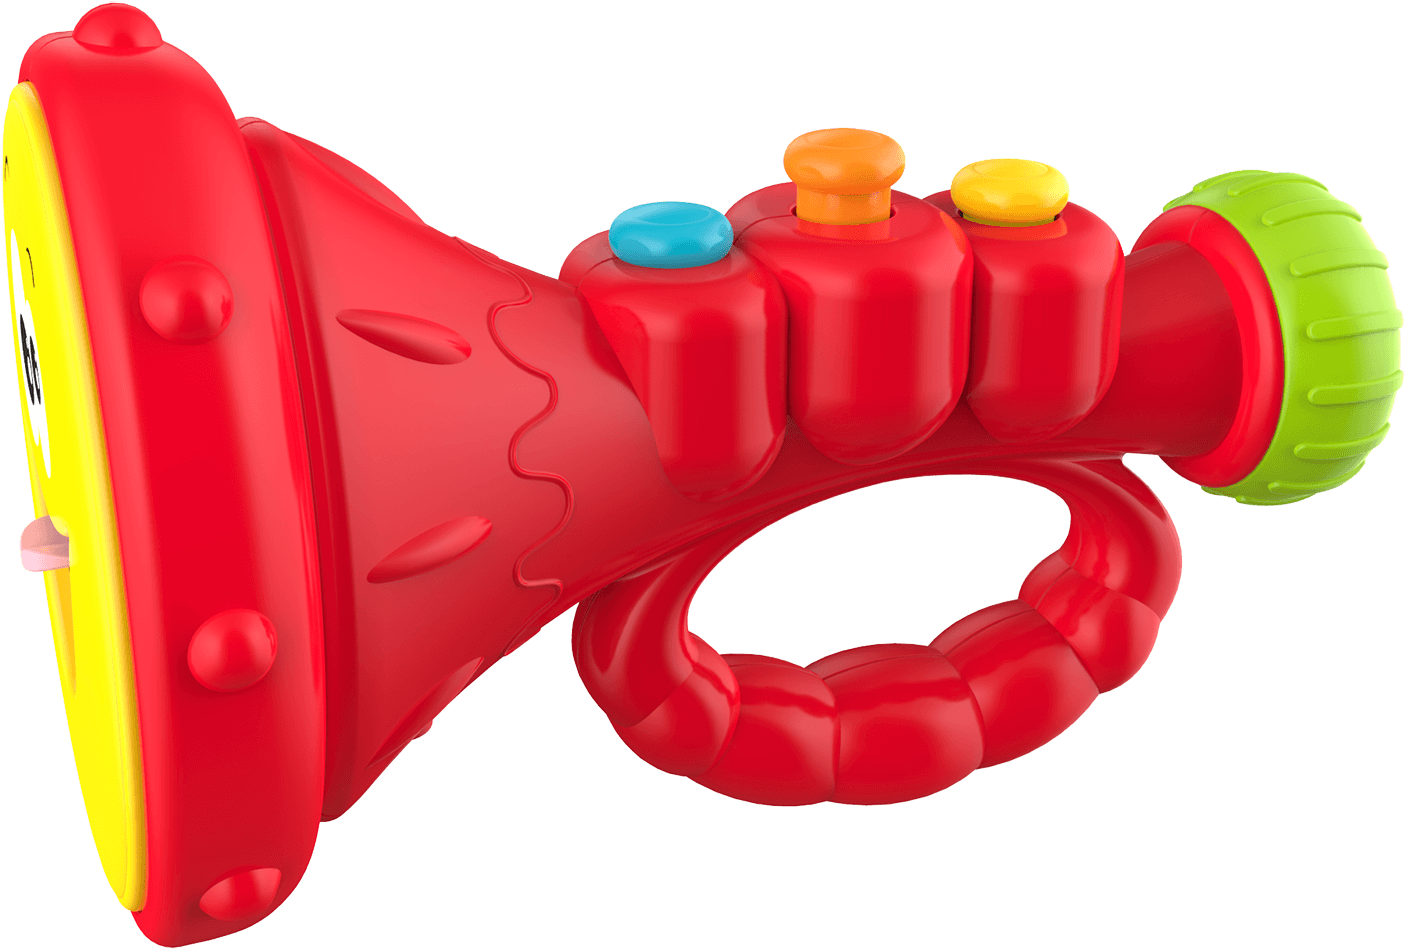 Colorful Childrens Trumpet Toy PNG